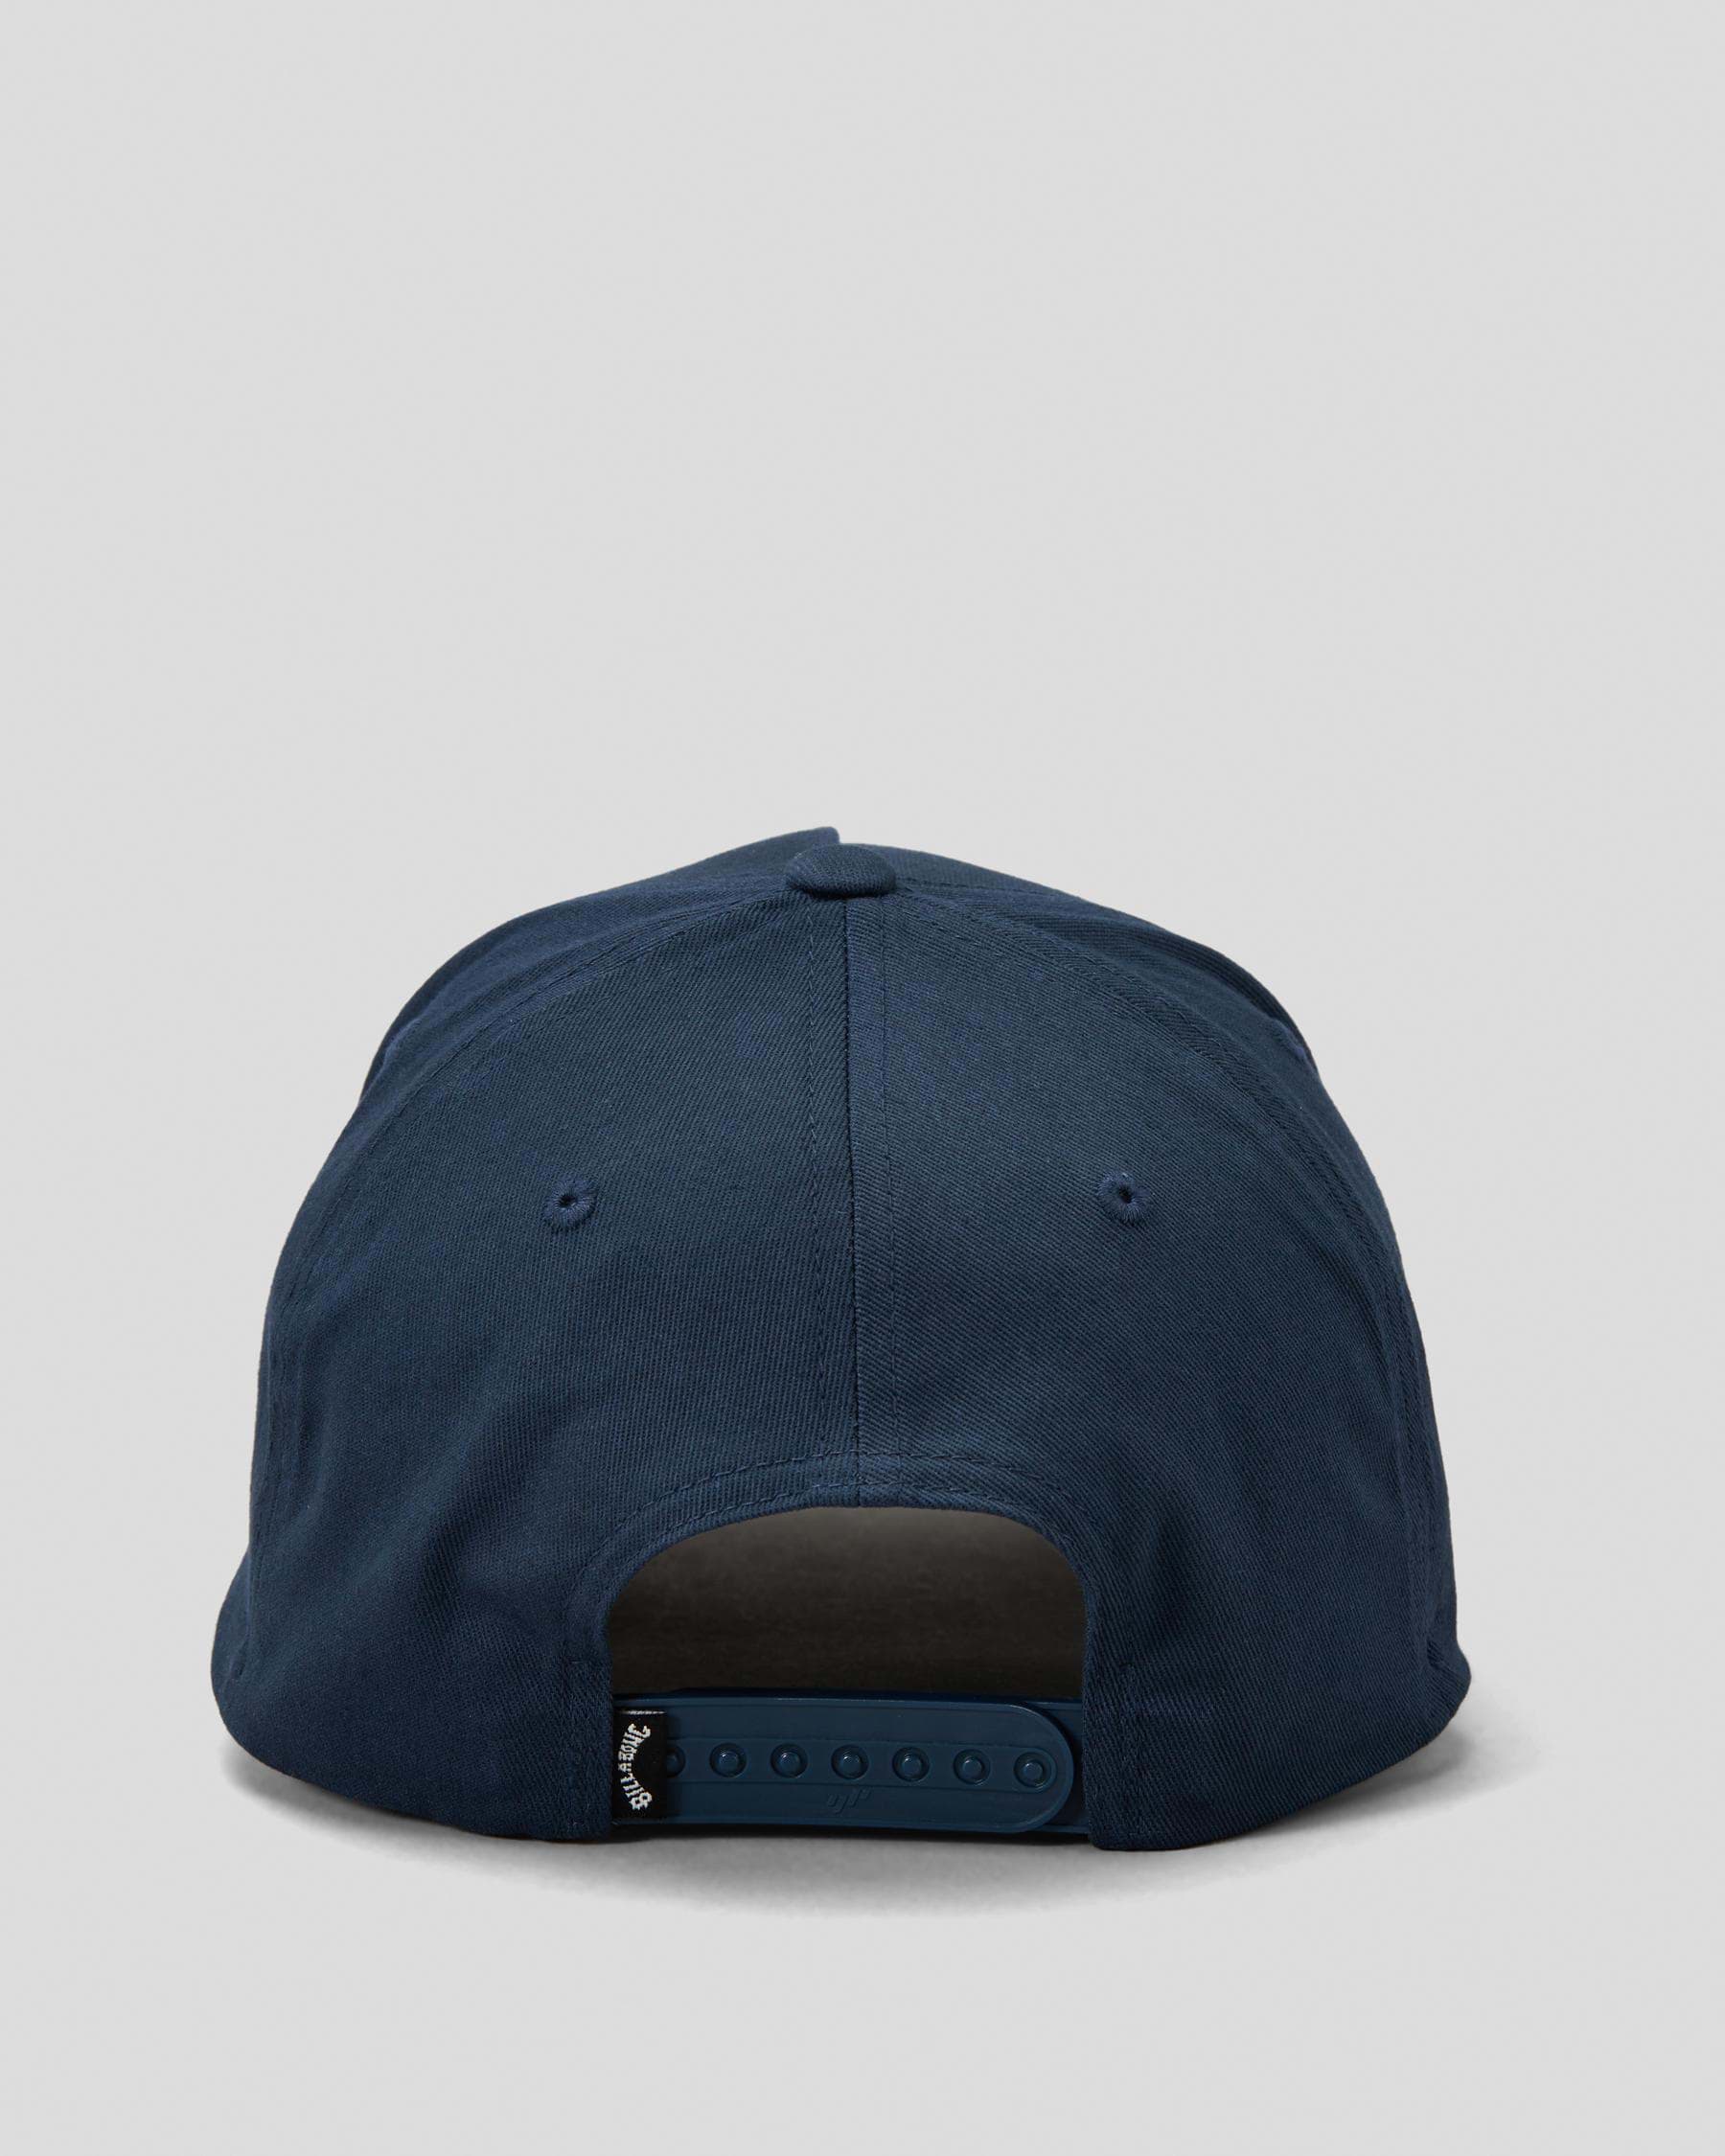 FREE* Shipping Snapback City Navy States Arch United Flexfit - Returns - Cap In 110 Easy & Beach Billabong